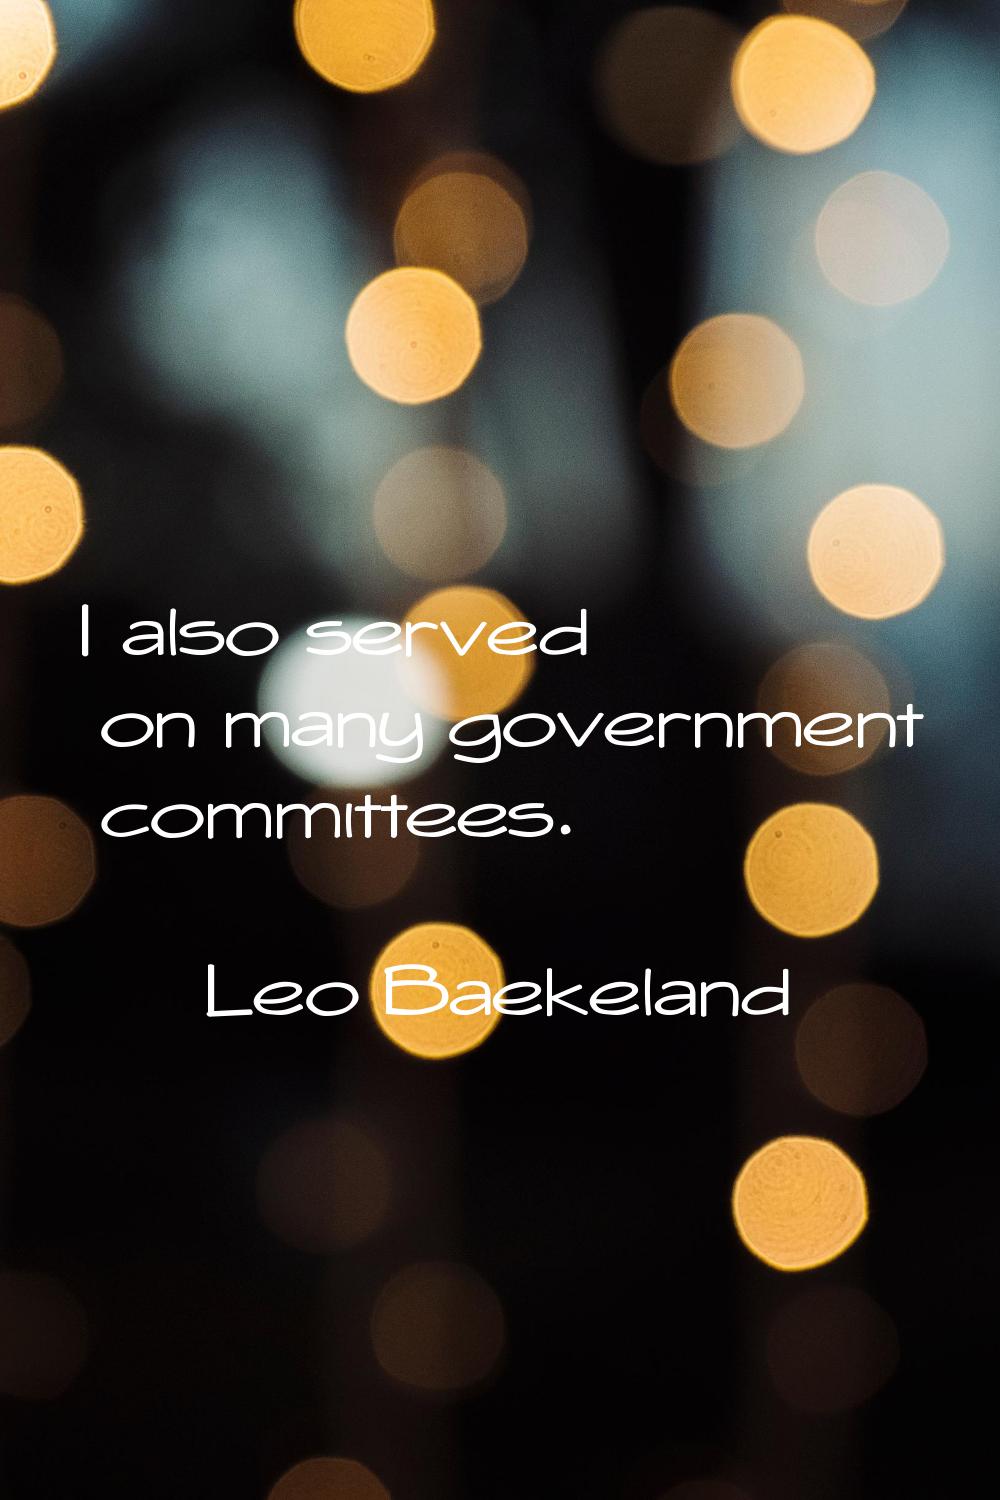 I also served on many government committees.